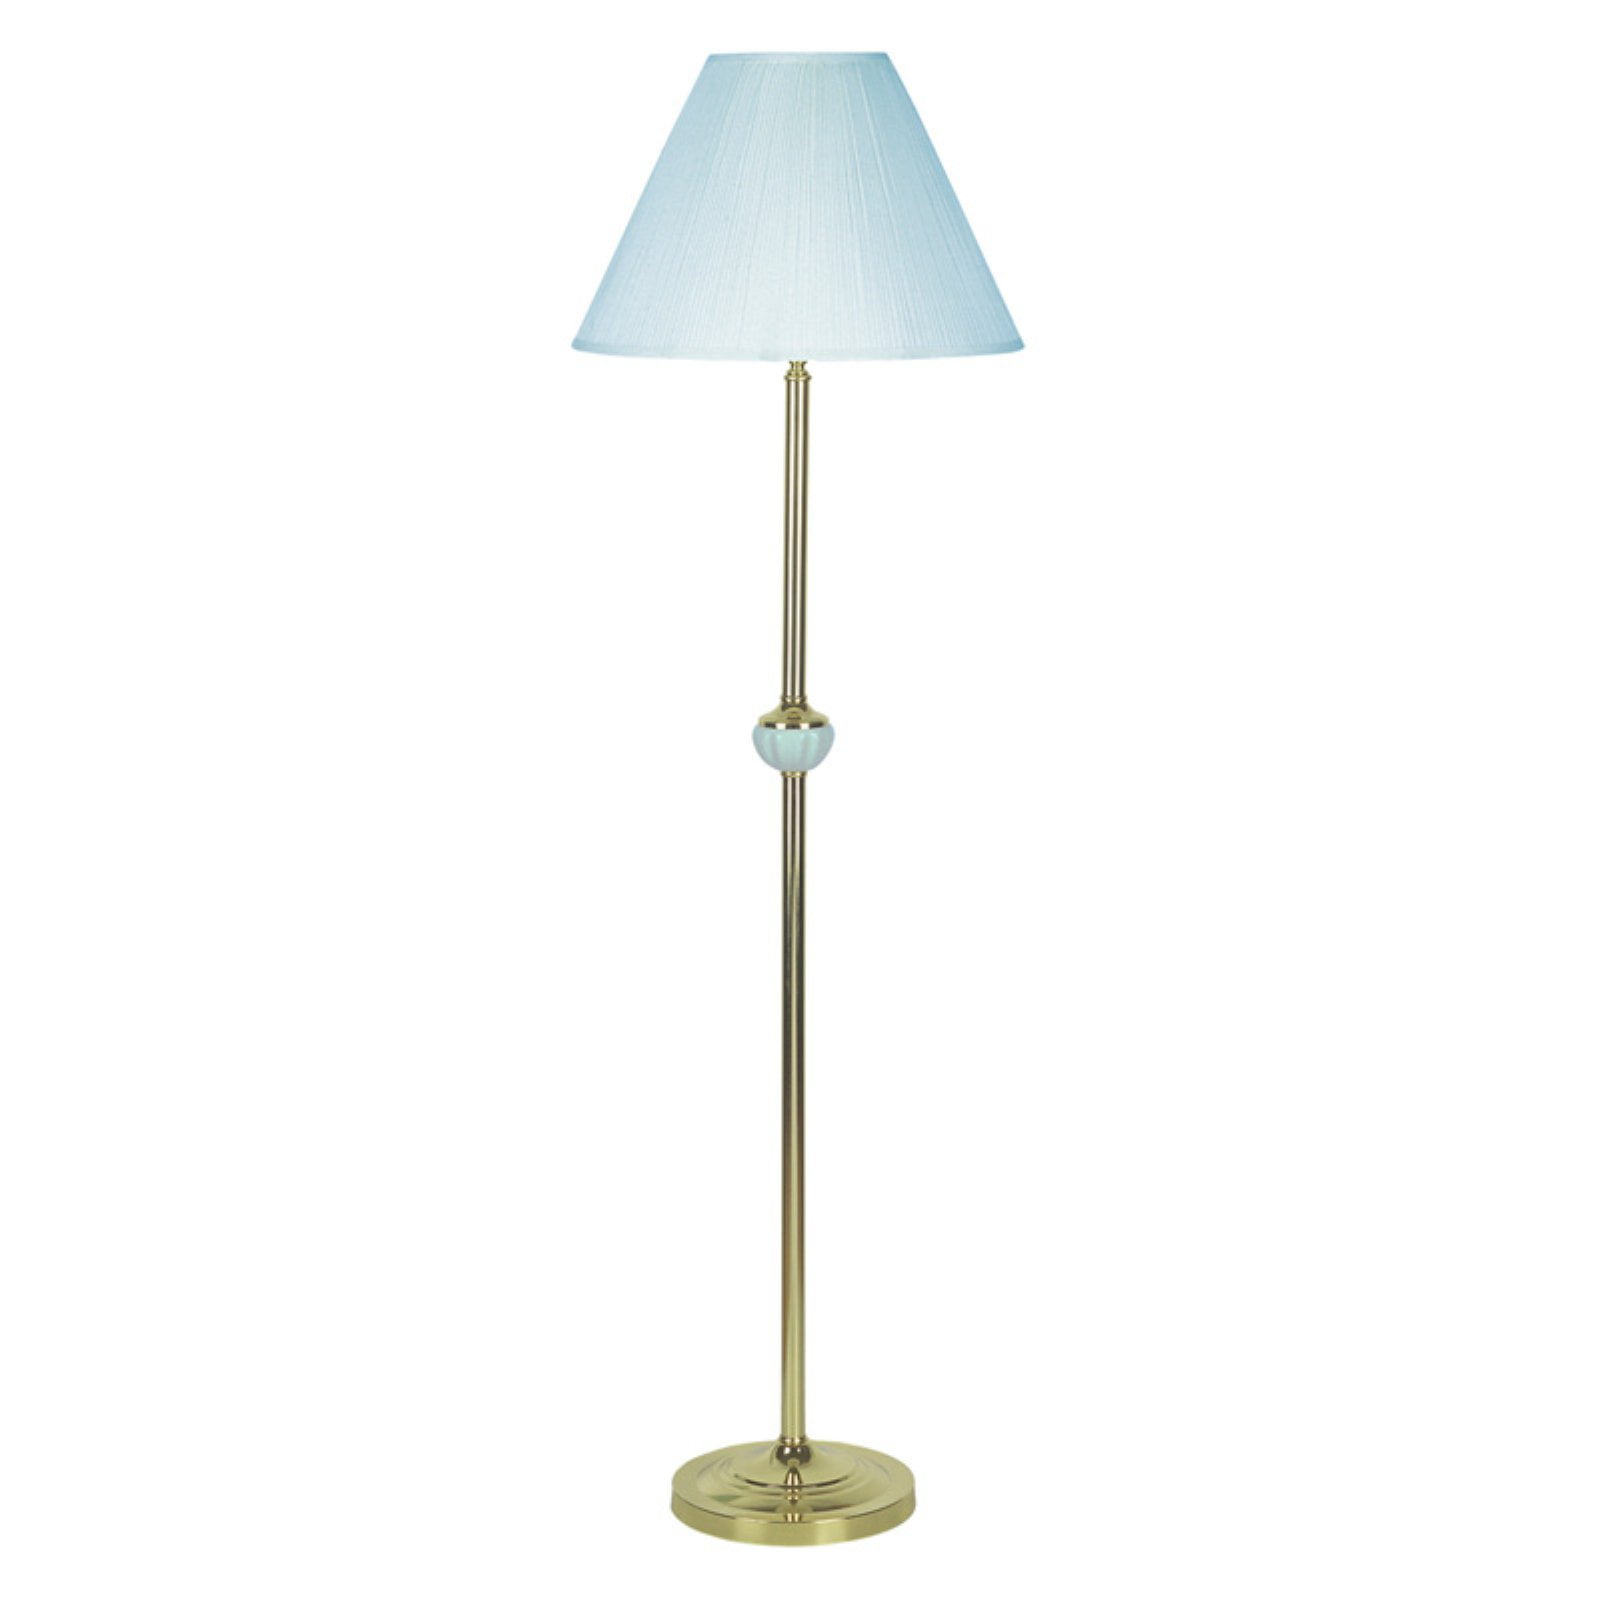 floor lamp with tall shade